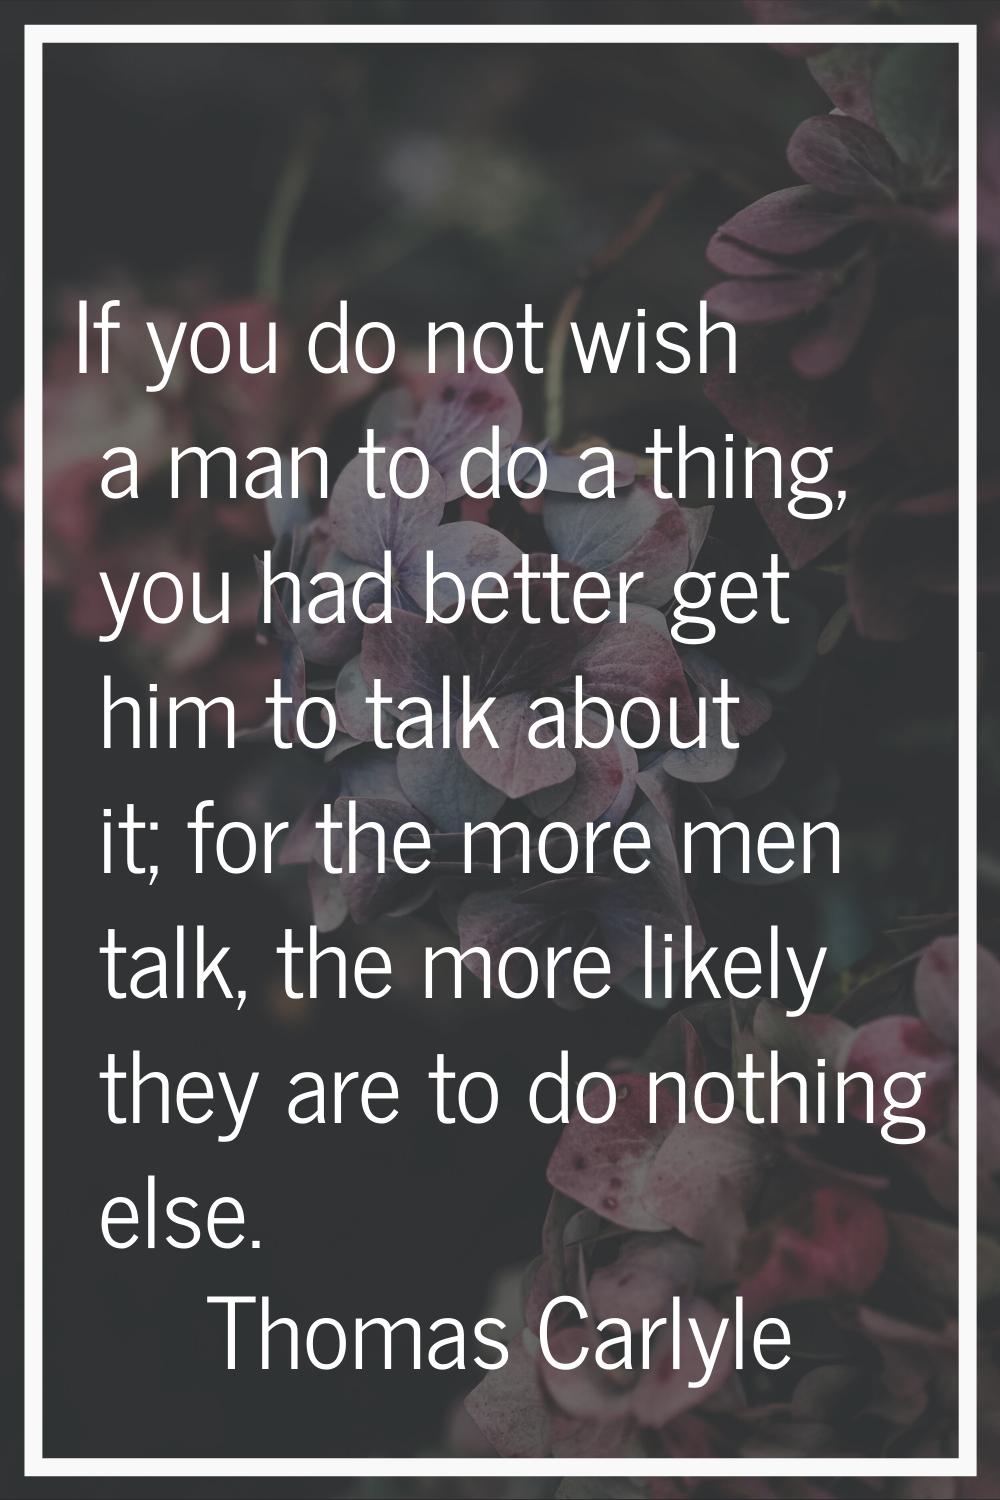 If you do not wish a man to do a thing, you had better get him to talk about it; for the more men t